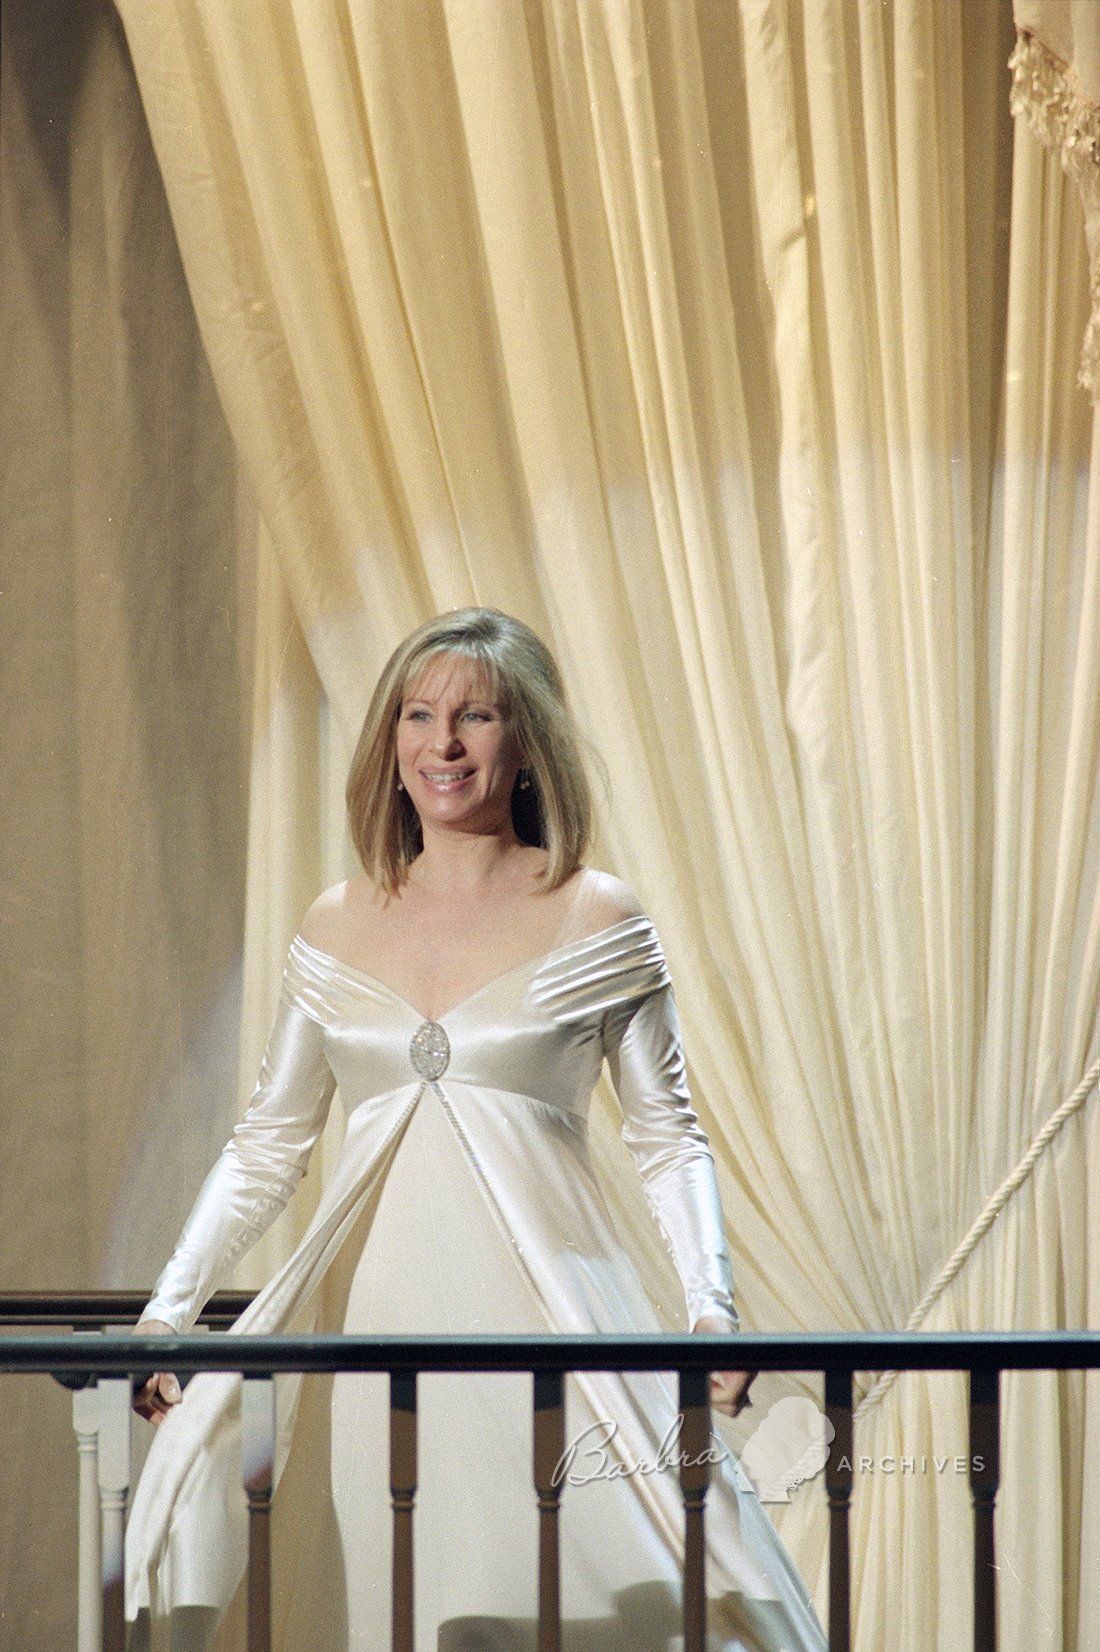 Barbra Streisand greets the audience in a cream gown at the beginning of her concert series in New York at Madison Square Garden Monday, June 20, 1994.